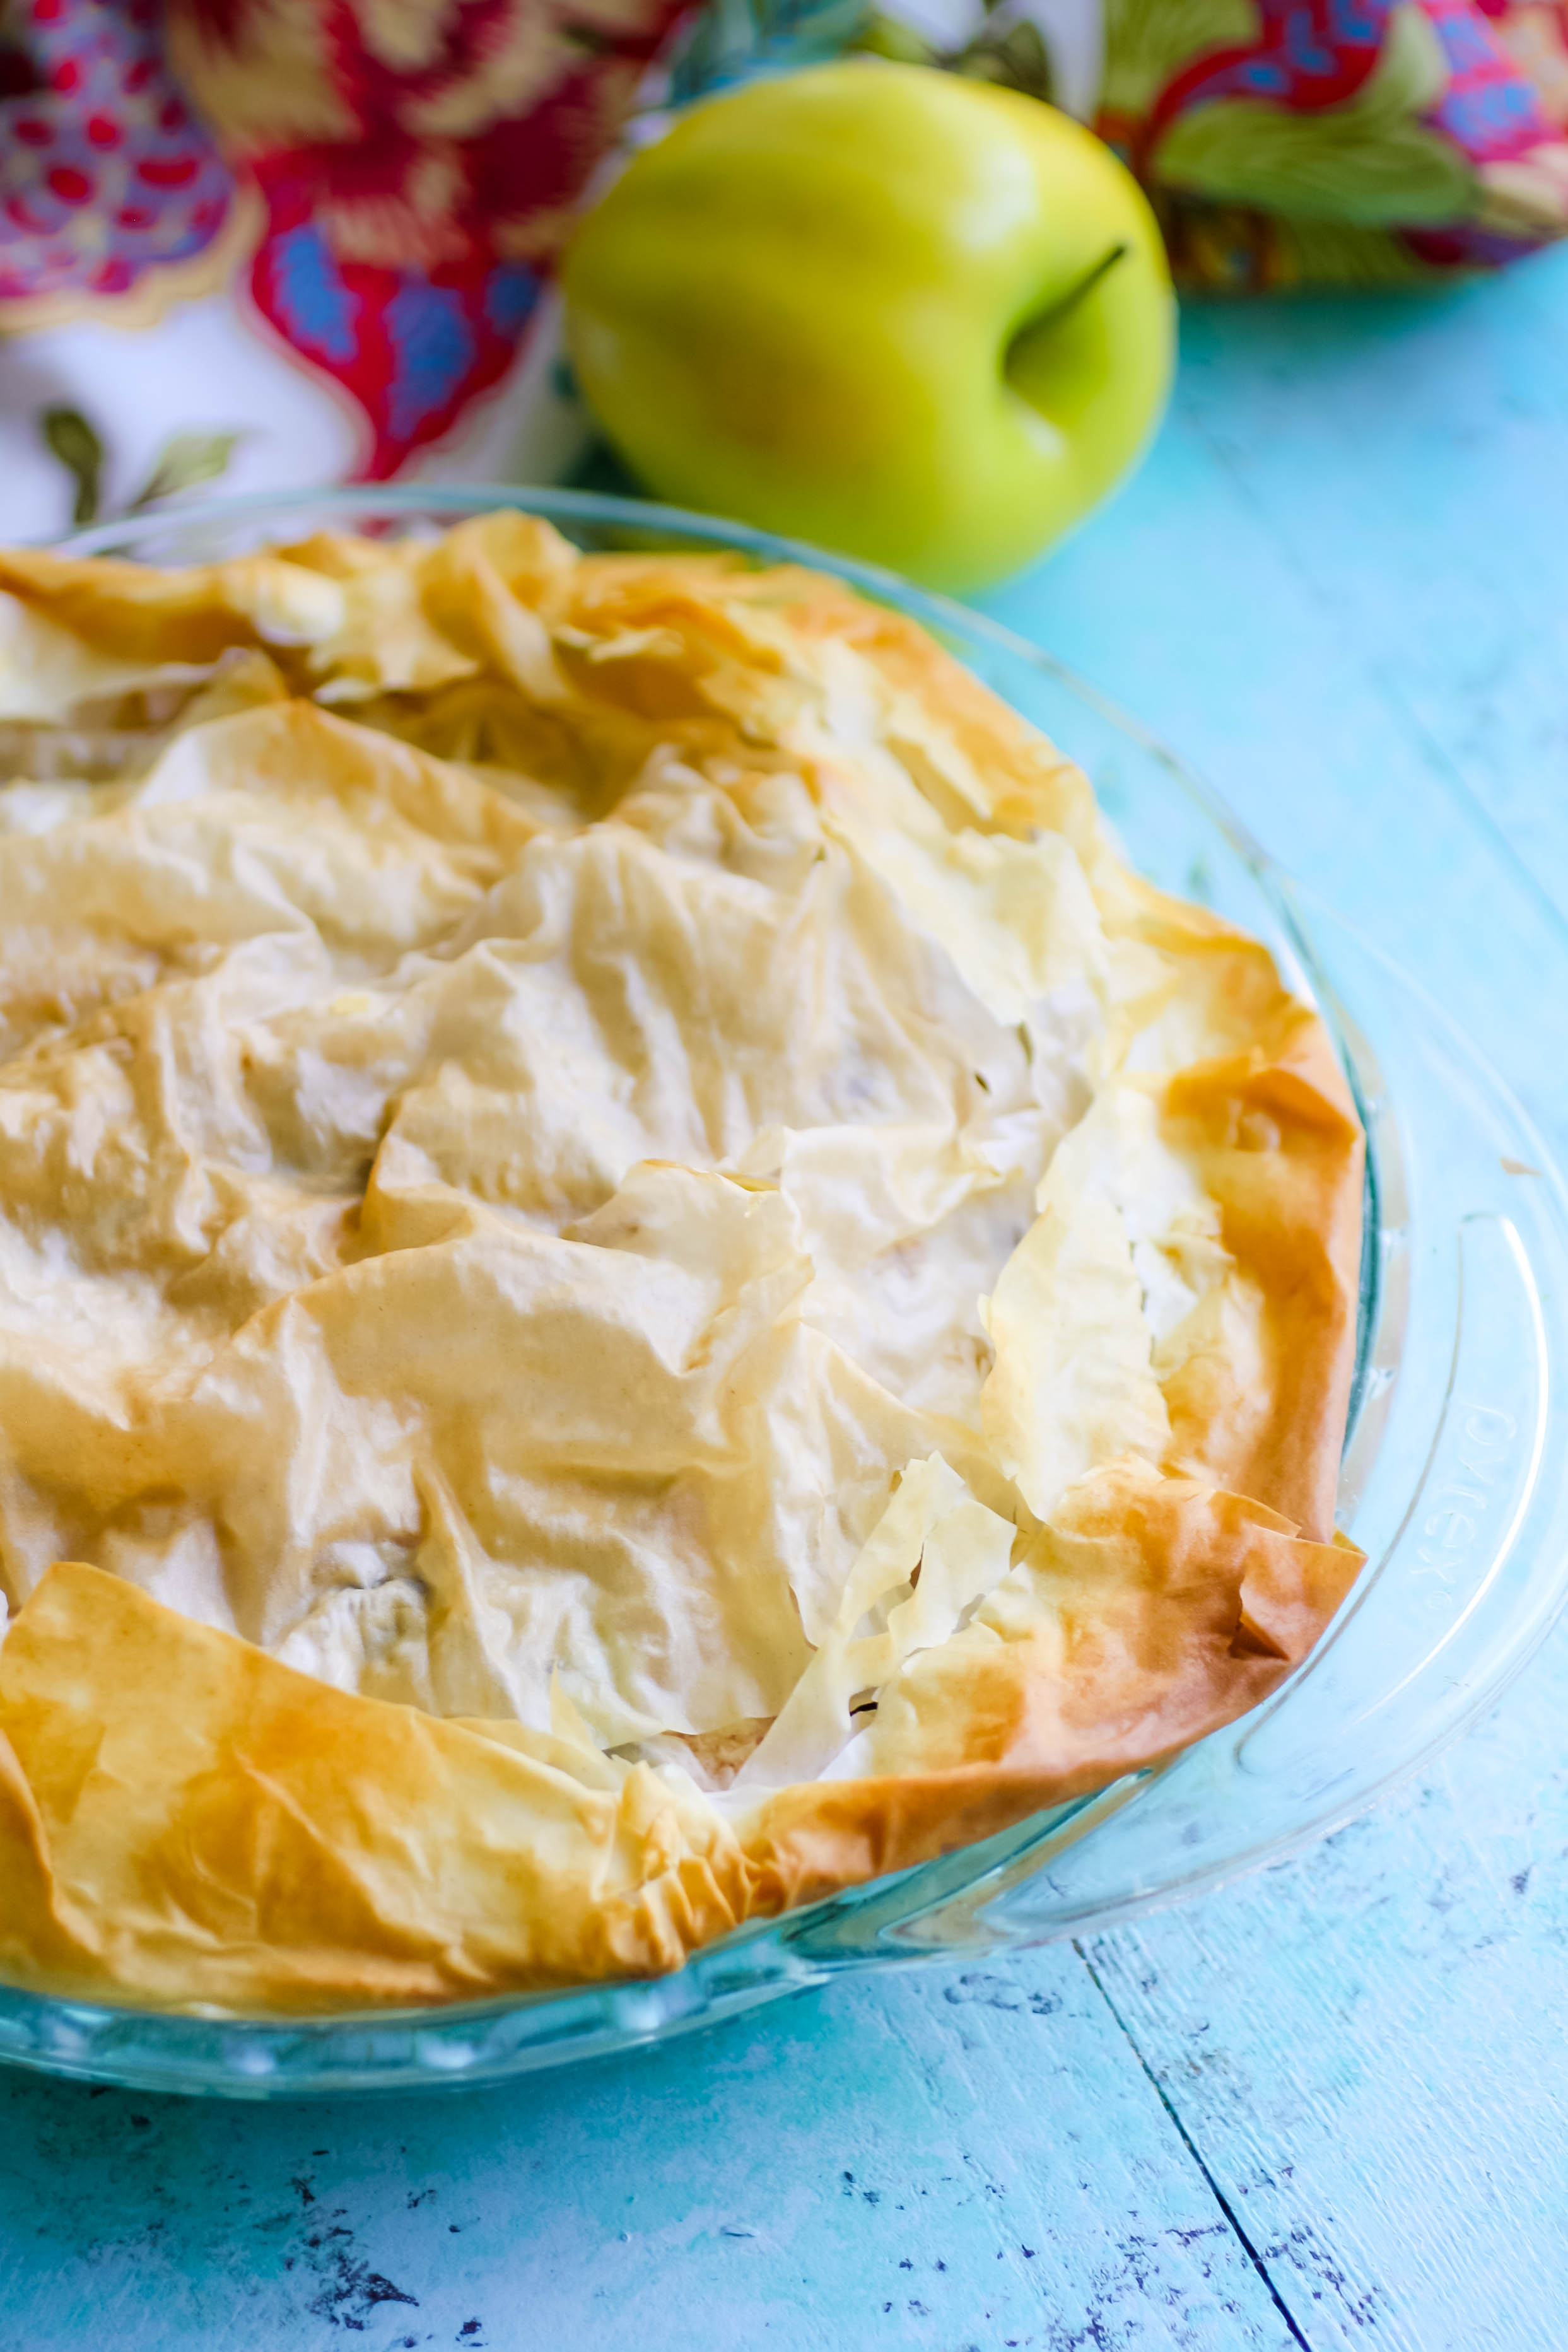 Apple-Cranberry Tart in Phyllo is flaky and flavorful as dessert! Apple-Cranberry Tart in Phyllo makes a wonderful dessert!